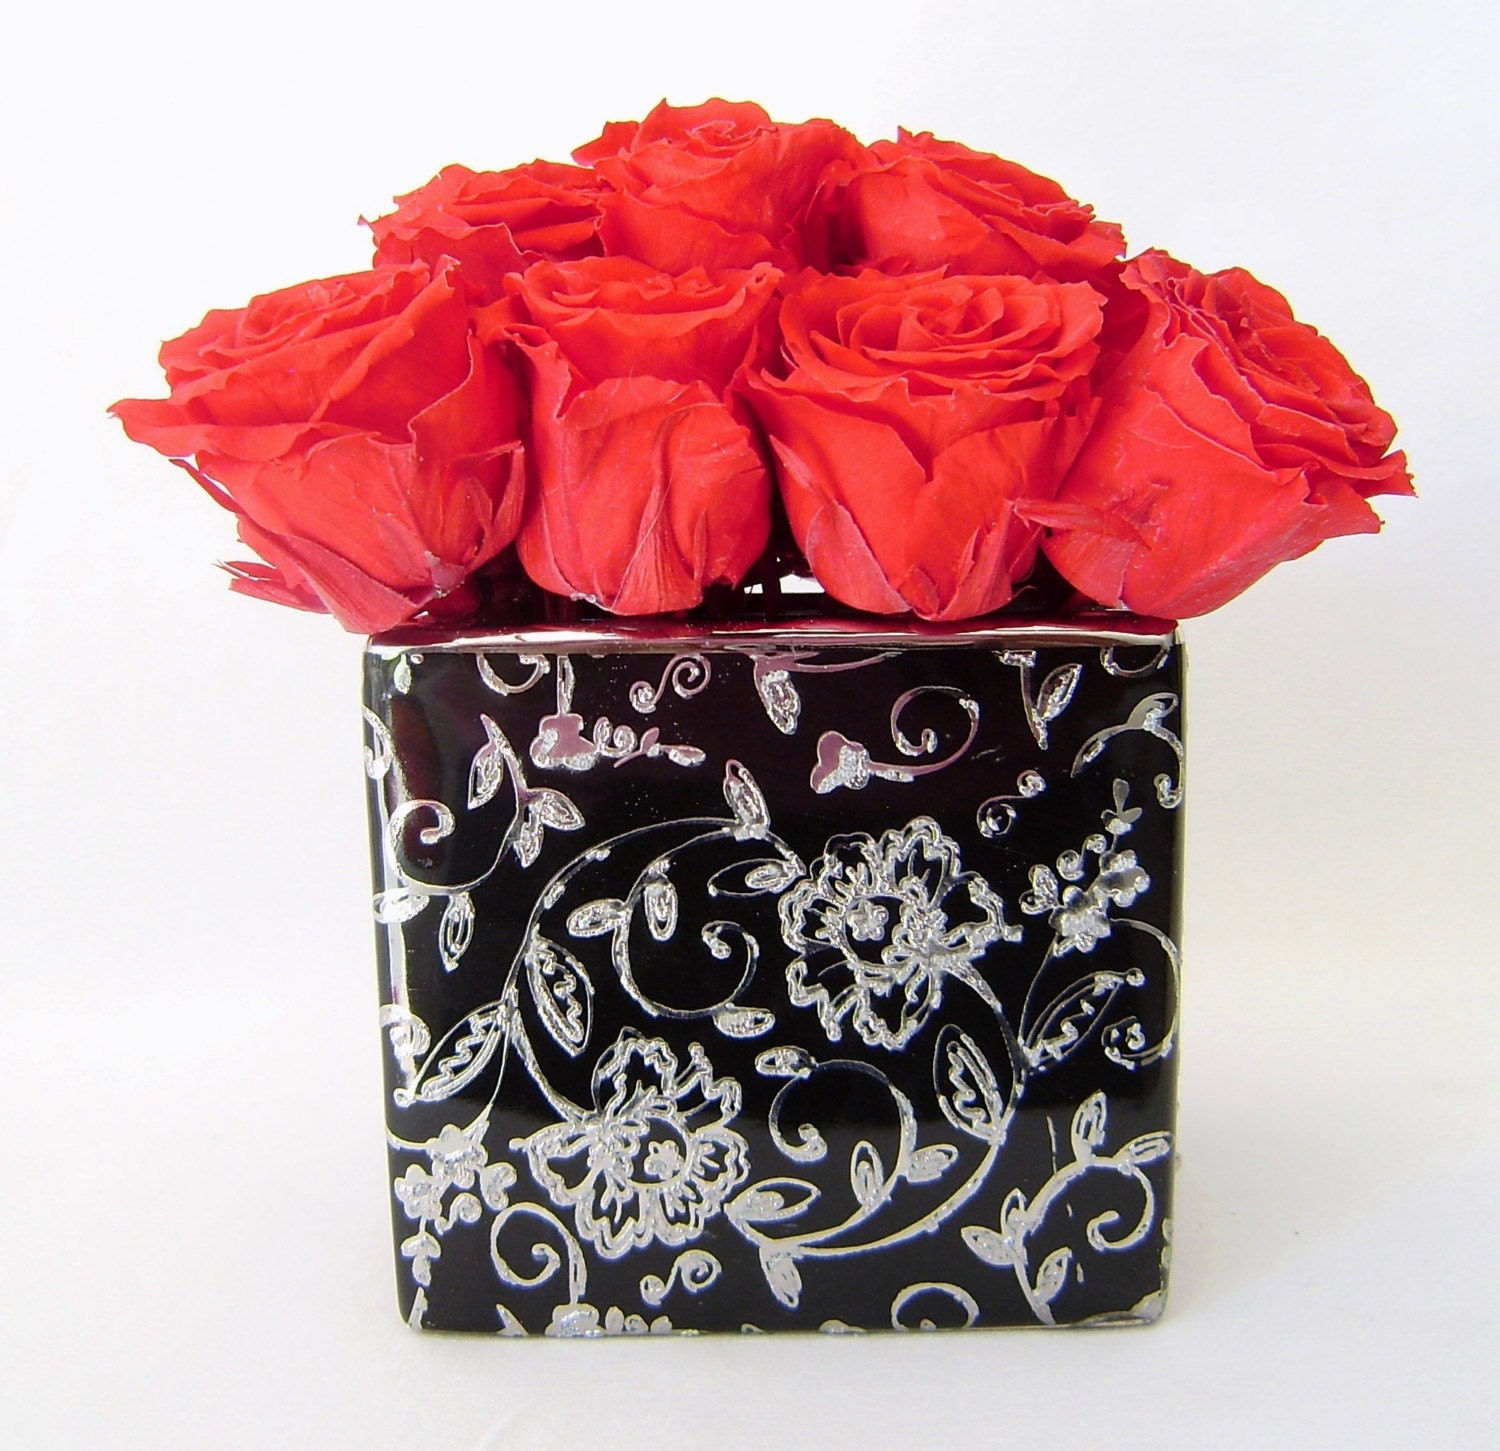 Preserved Red Roses Wedding Flowers by MelroseFields on Etsy